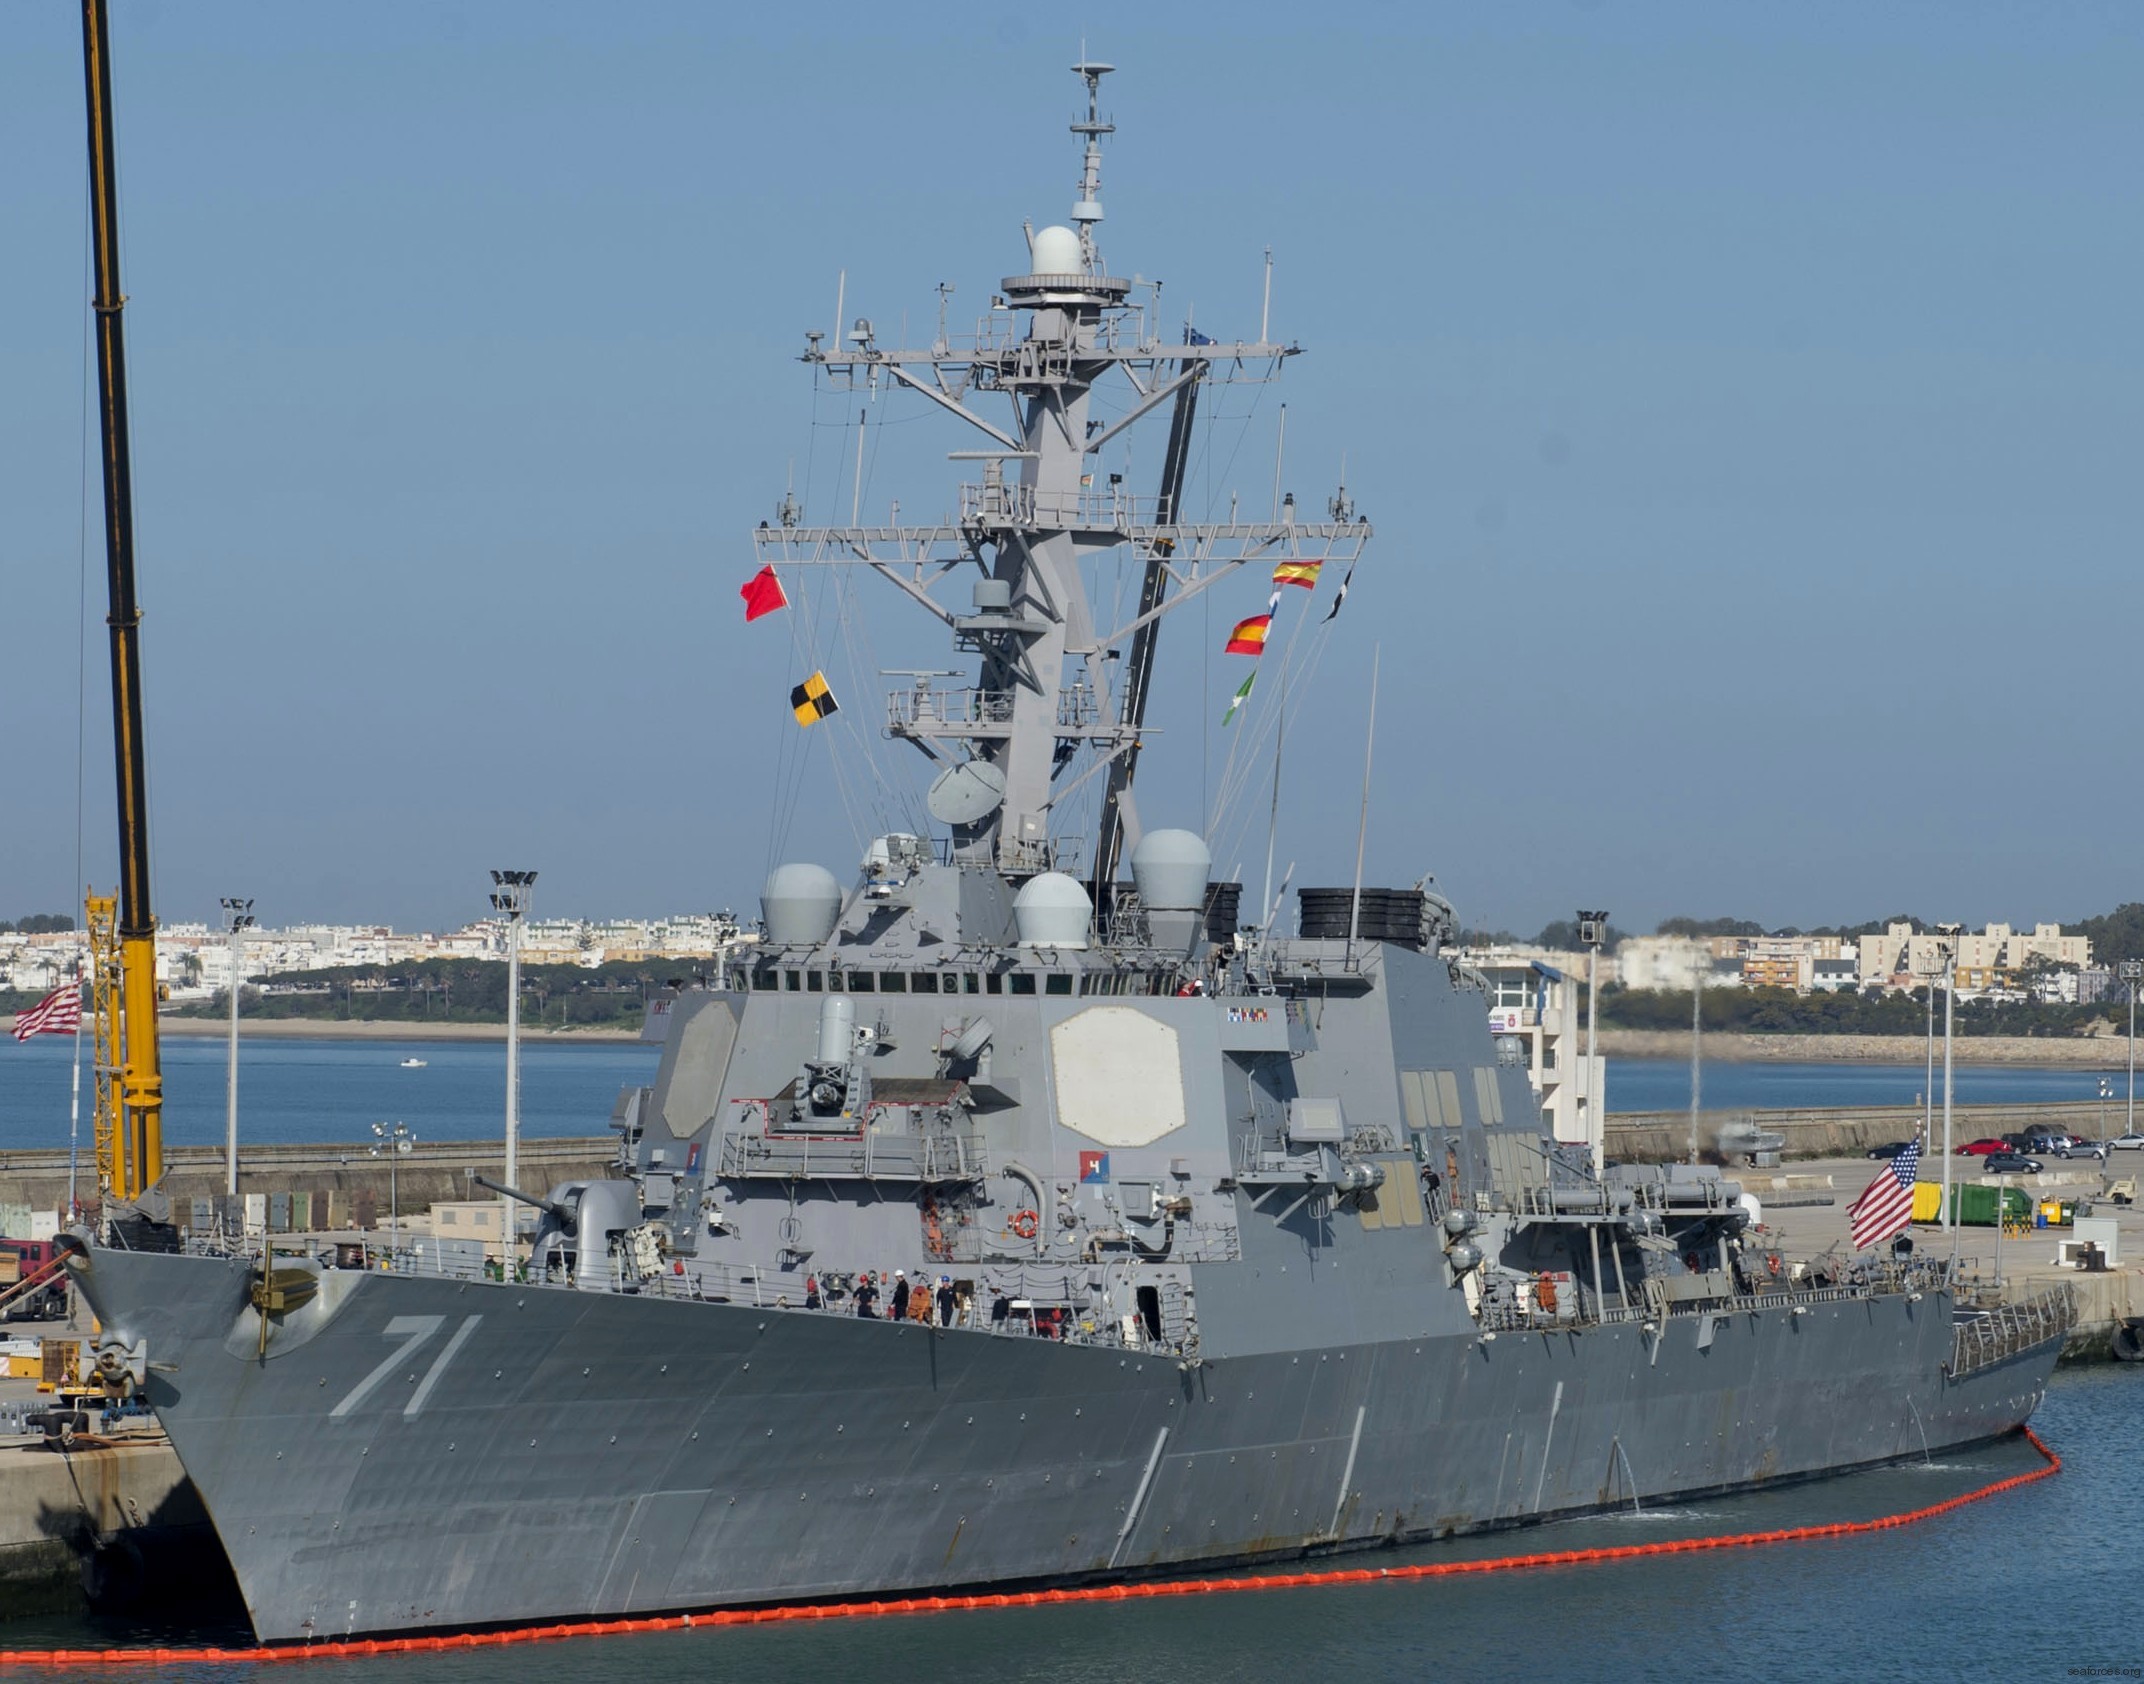 ddg-71 uss ross guided missile destroyer arleigh burke class aegis bmd 36 naval station rota spain